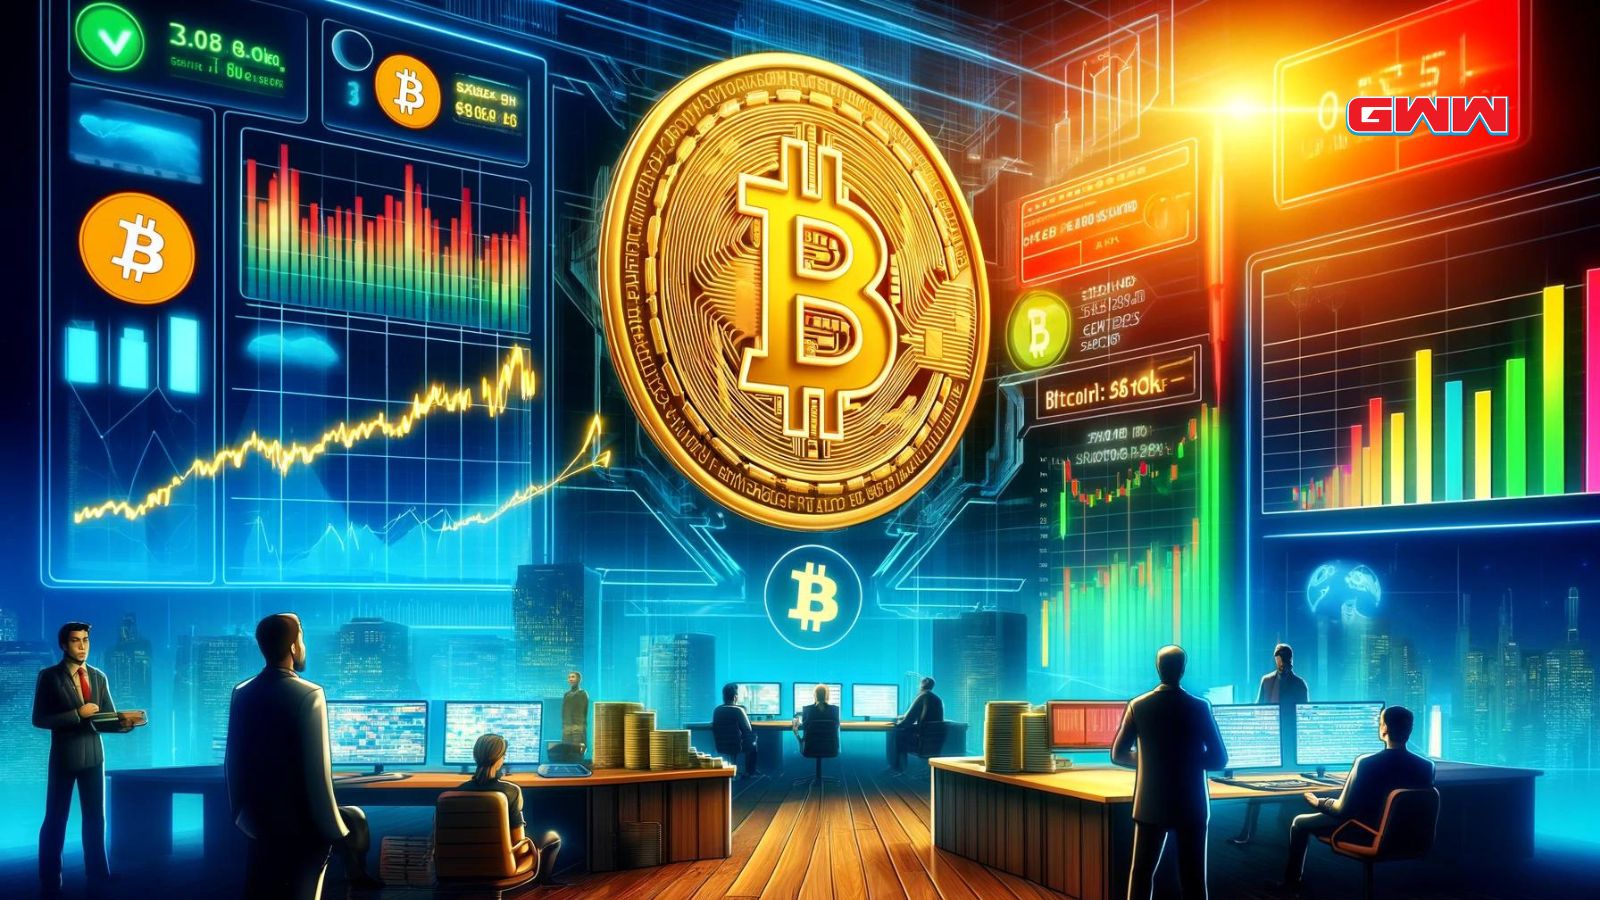 A vibrant digital scene depicting Bitcoin's price holding strong at $66.9K